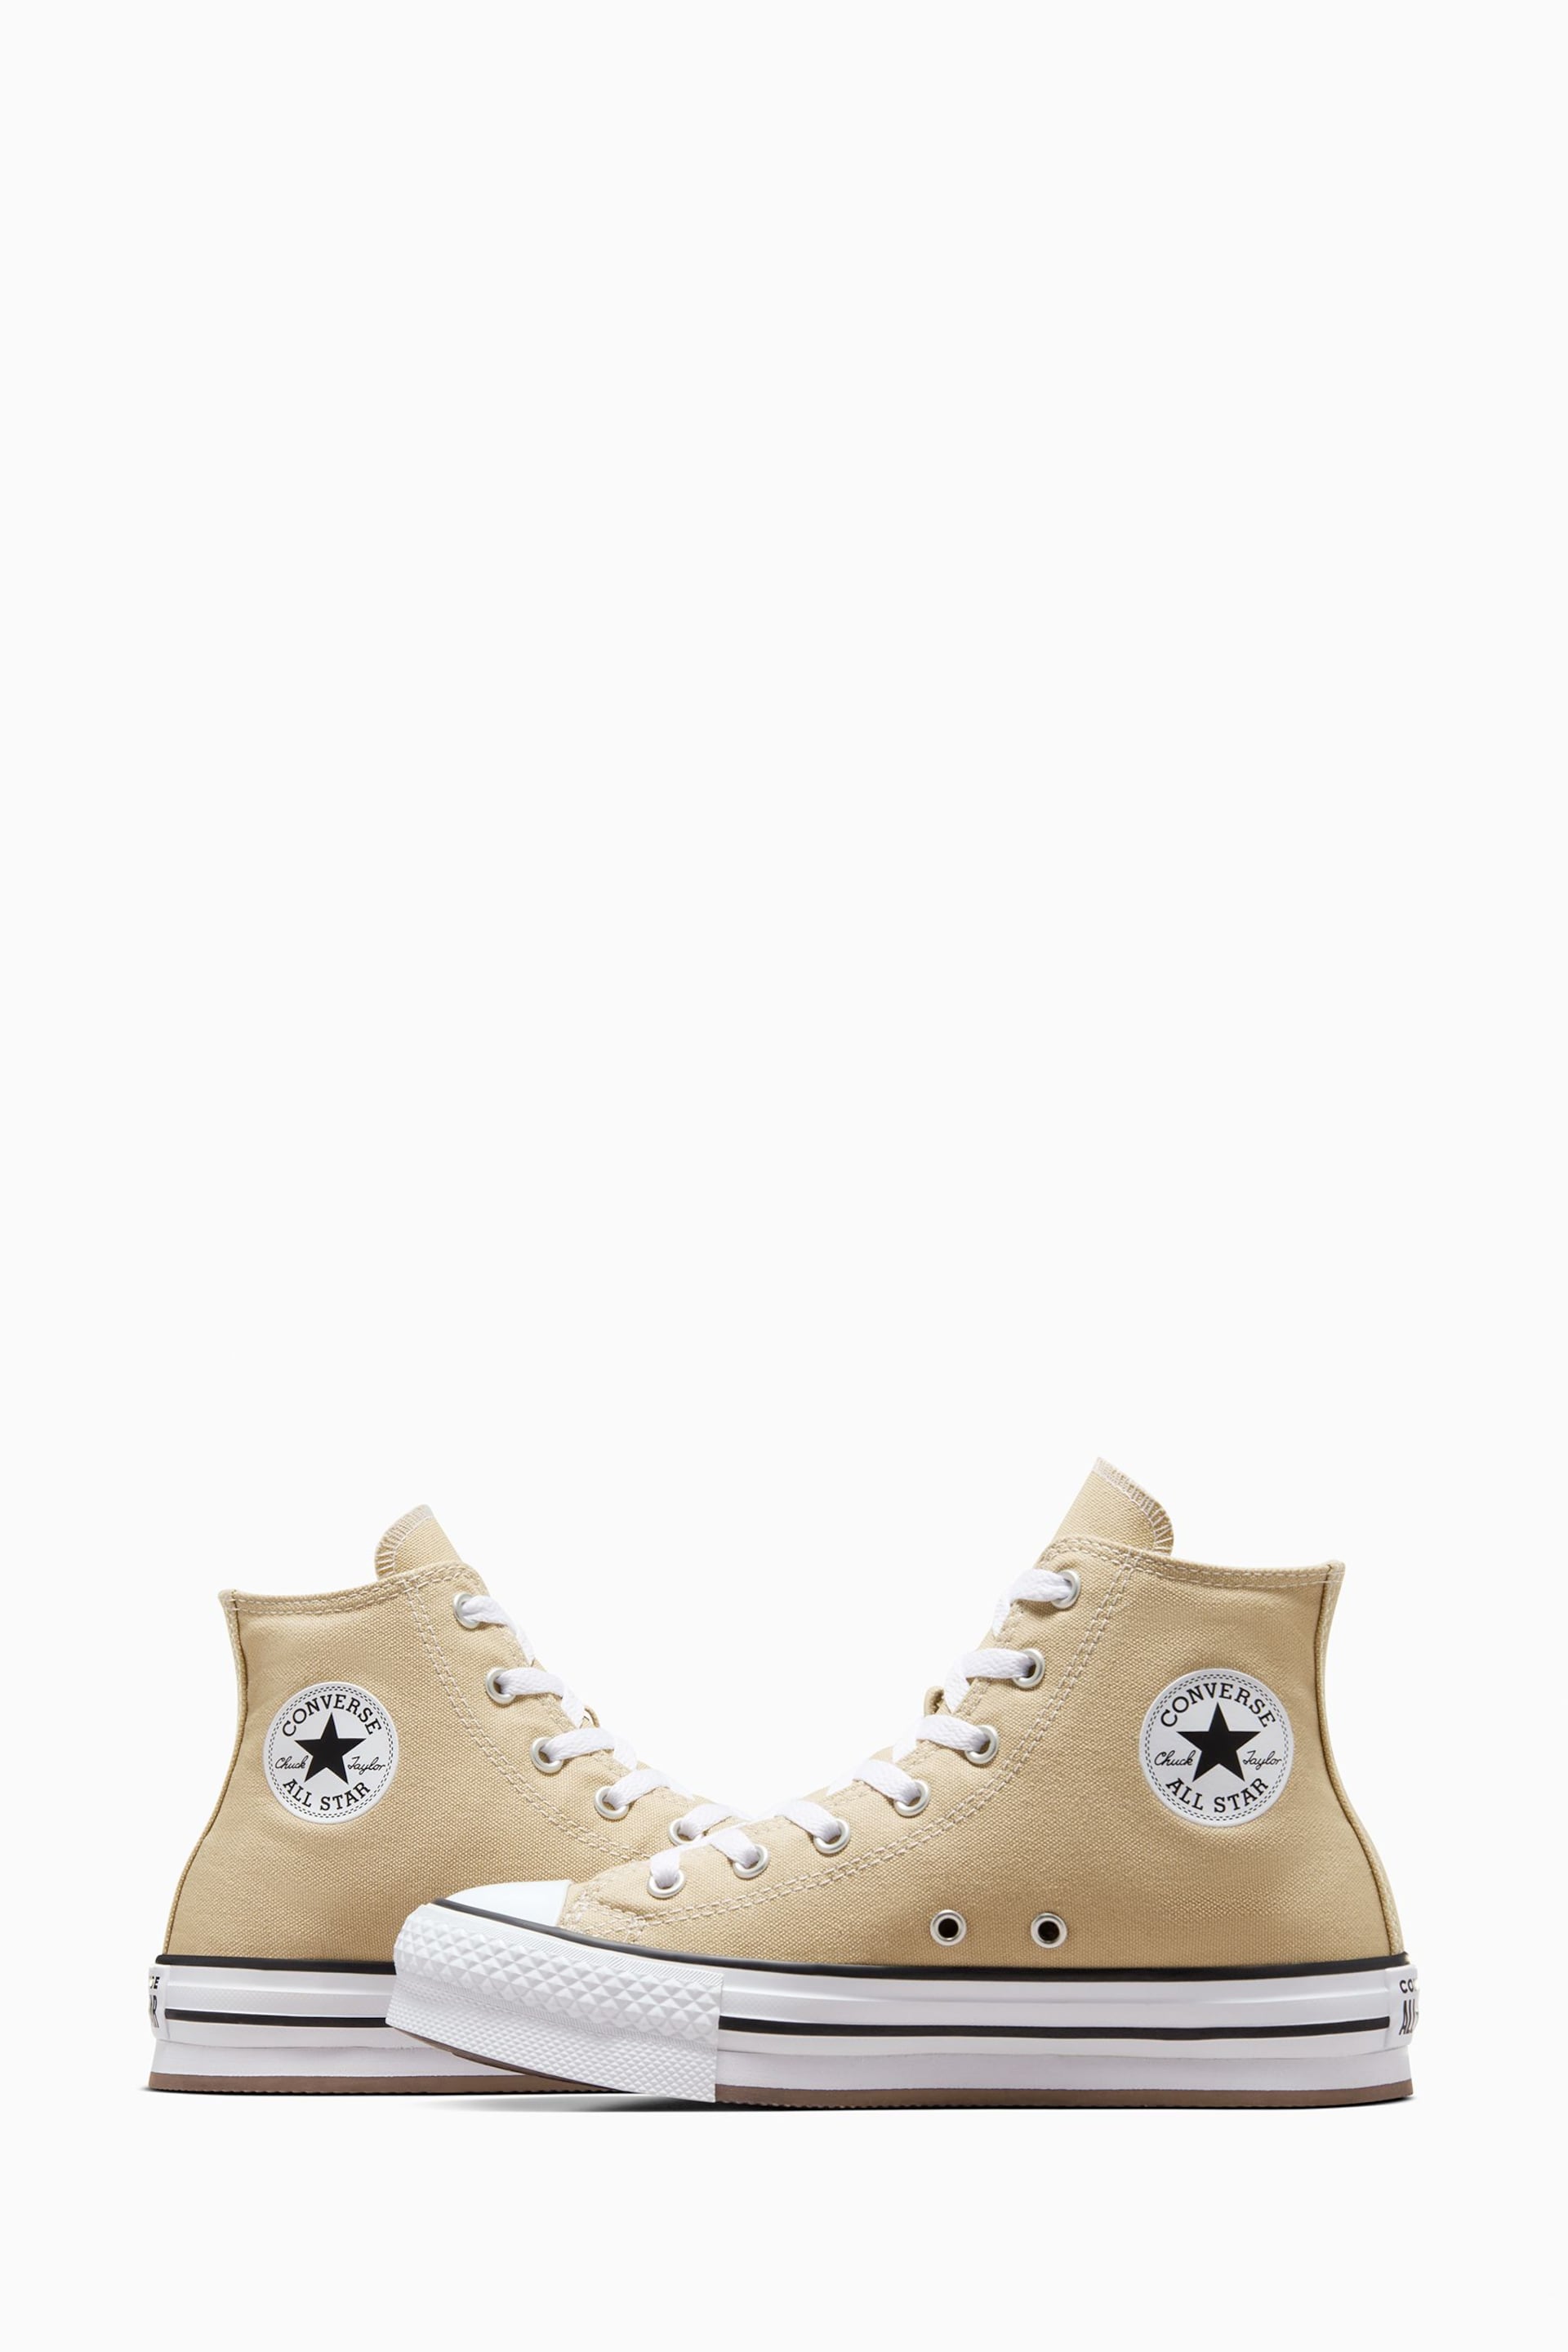 Converse Neutral All Star EVA Lift Junior Trainers - Image 4 of 7